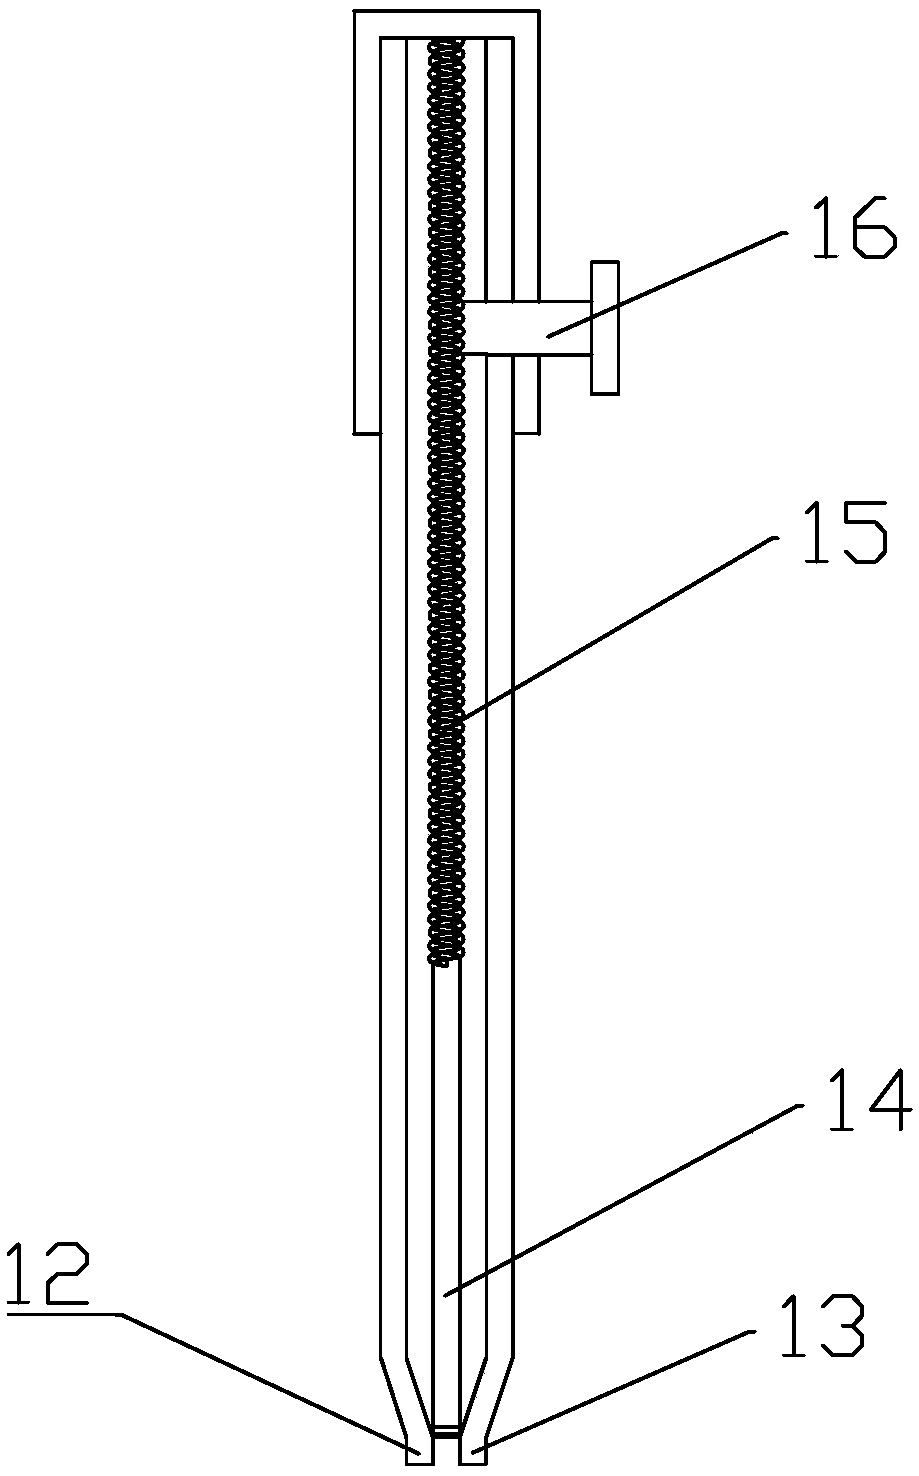 Auxiliary acupuncture needle feeding device driven by mechanical and electromagnetic hybrid power